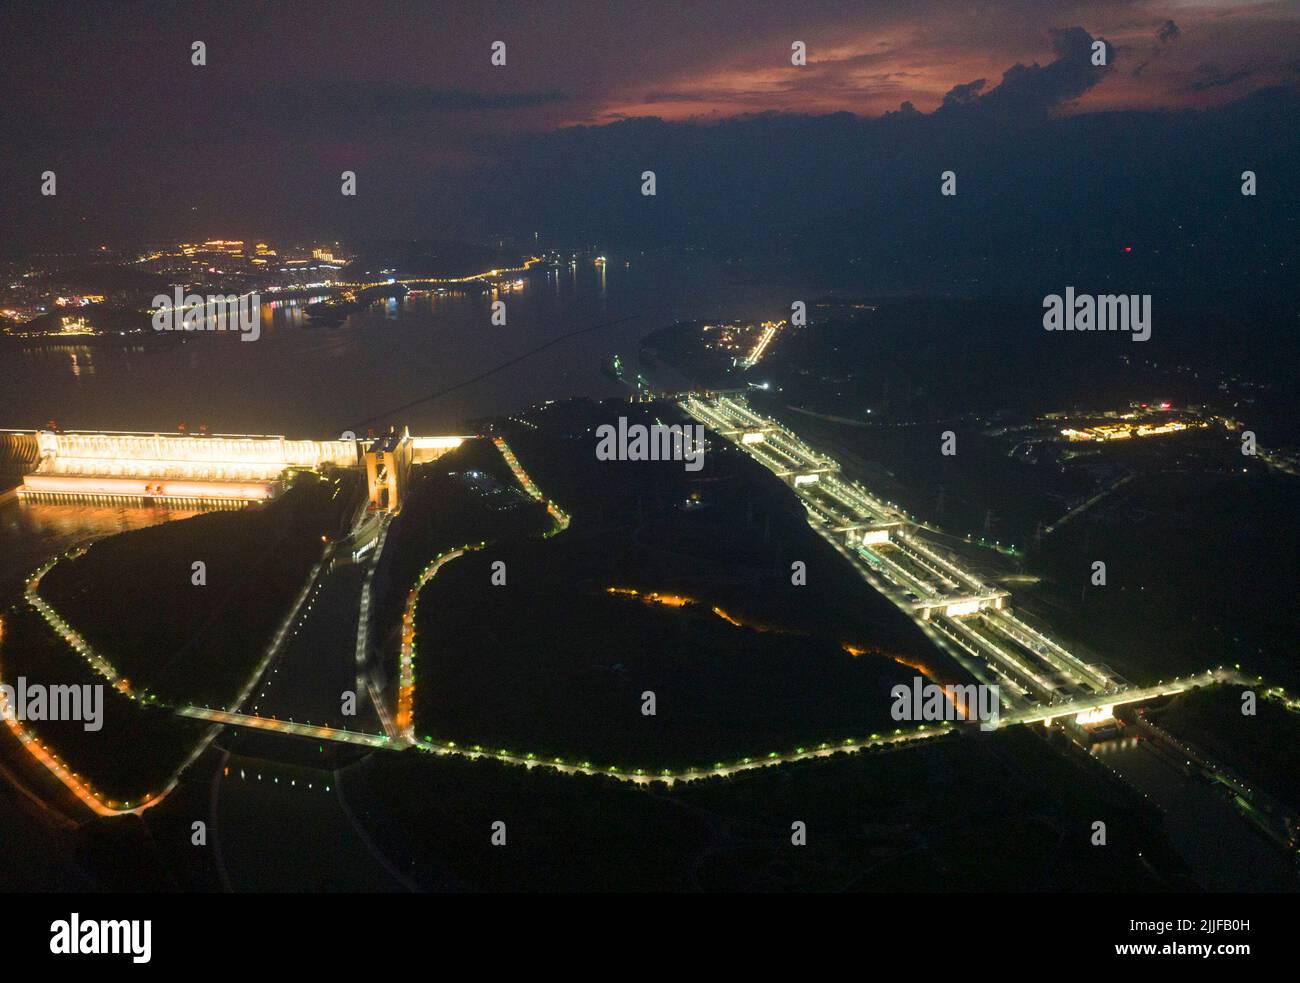 YICHANG, CHINA - JULY 25, 2022 - Aerial photo taken on July 25, 2022 shows ships passing through the five-level lock of the Three Gorges Dam in Yichan Stock Photo